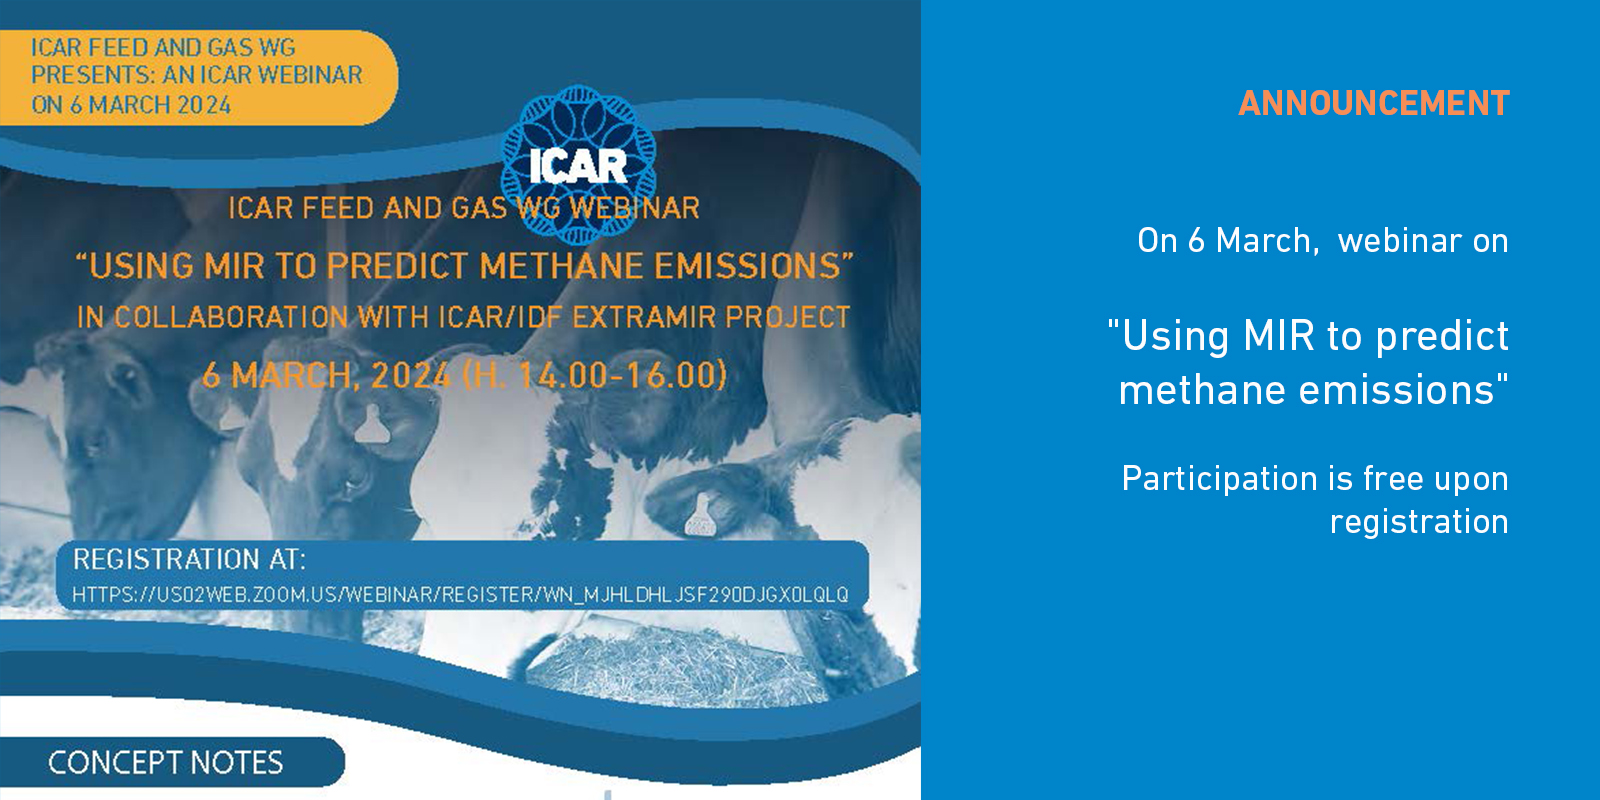 On 6 March (h. 14.00-16.00 Paris time), open webinar on “Using MIR to predict methane emissions”